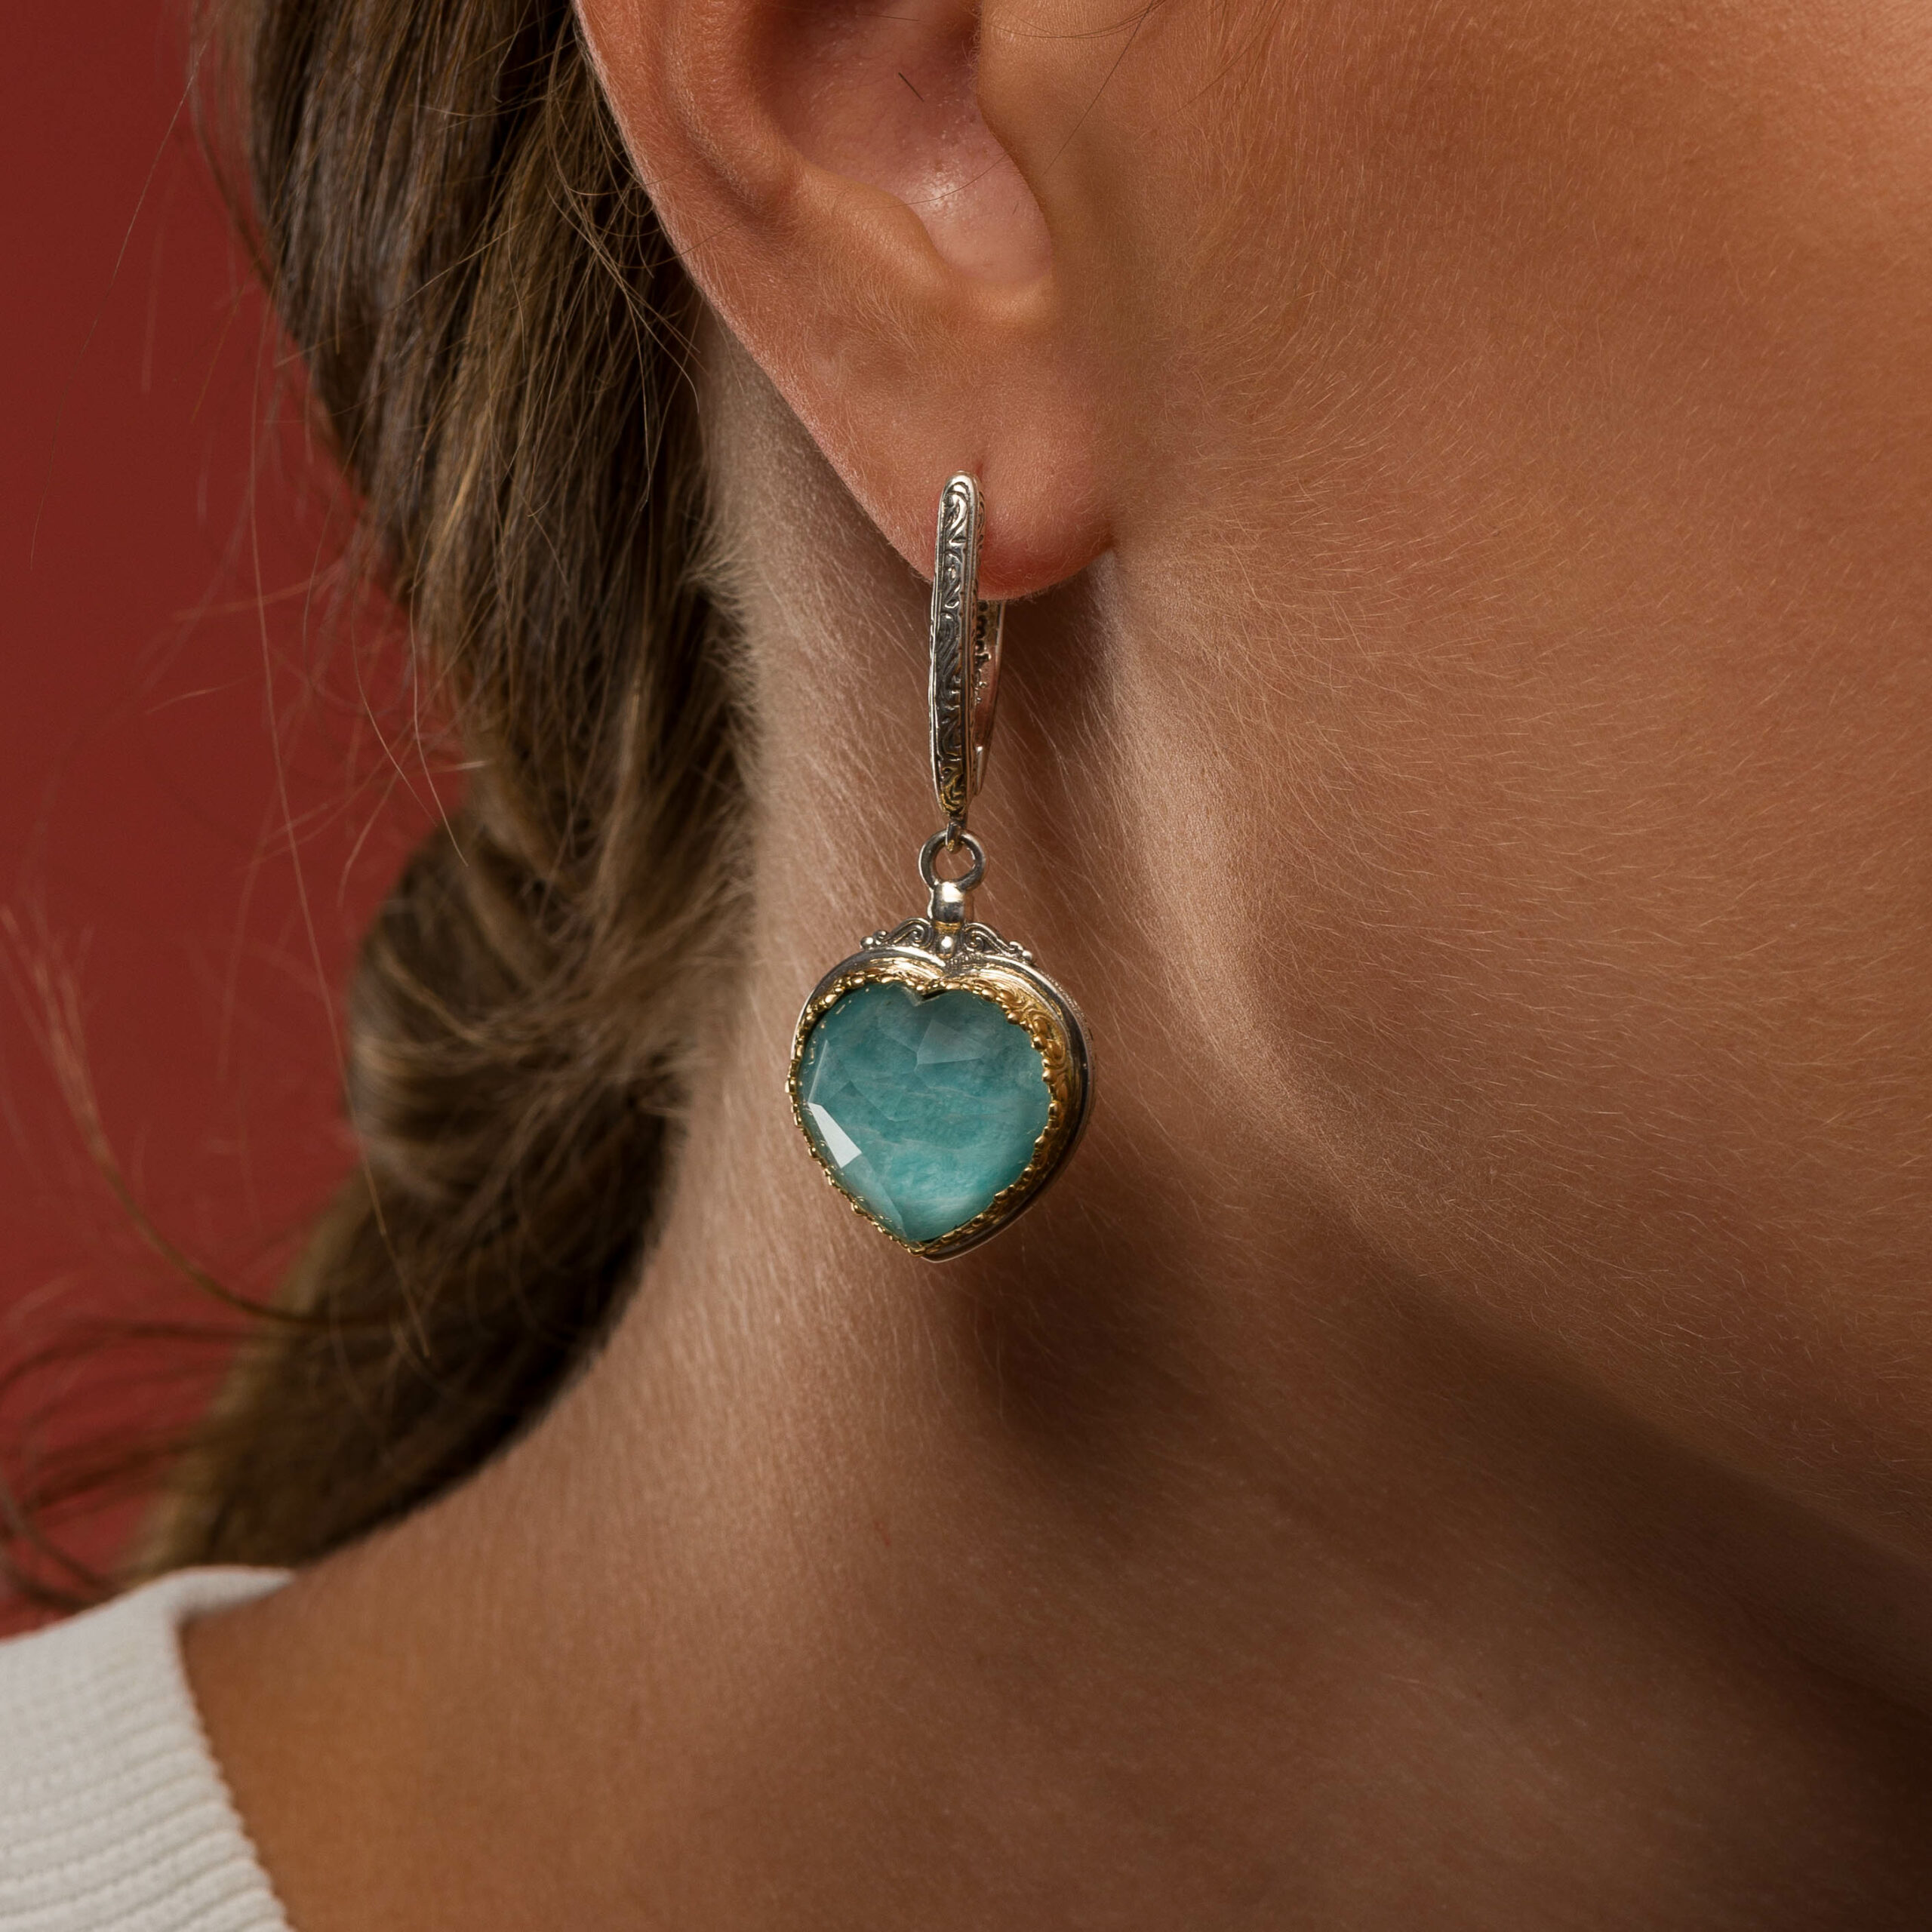 Iris Heart earrings in 18K Gold and Sterling Silver with amazonite